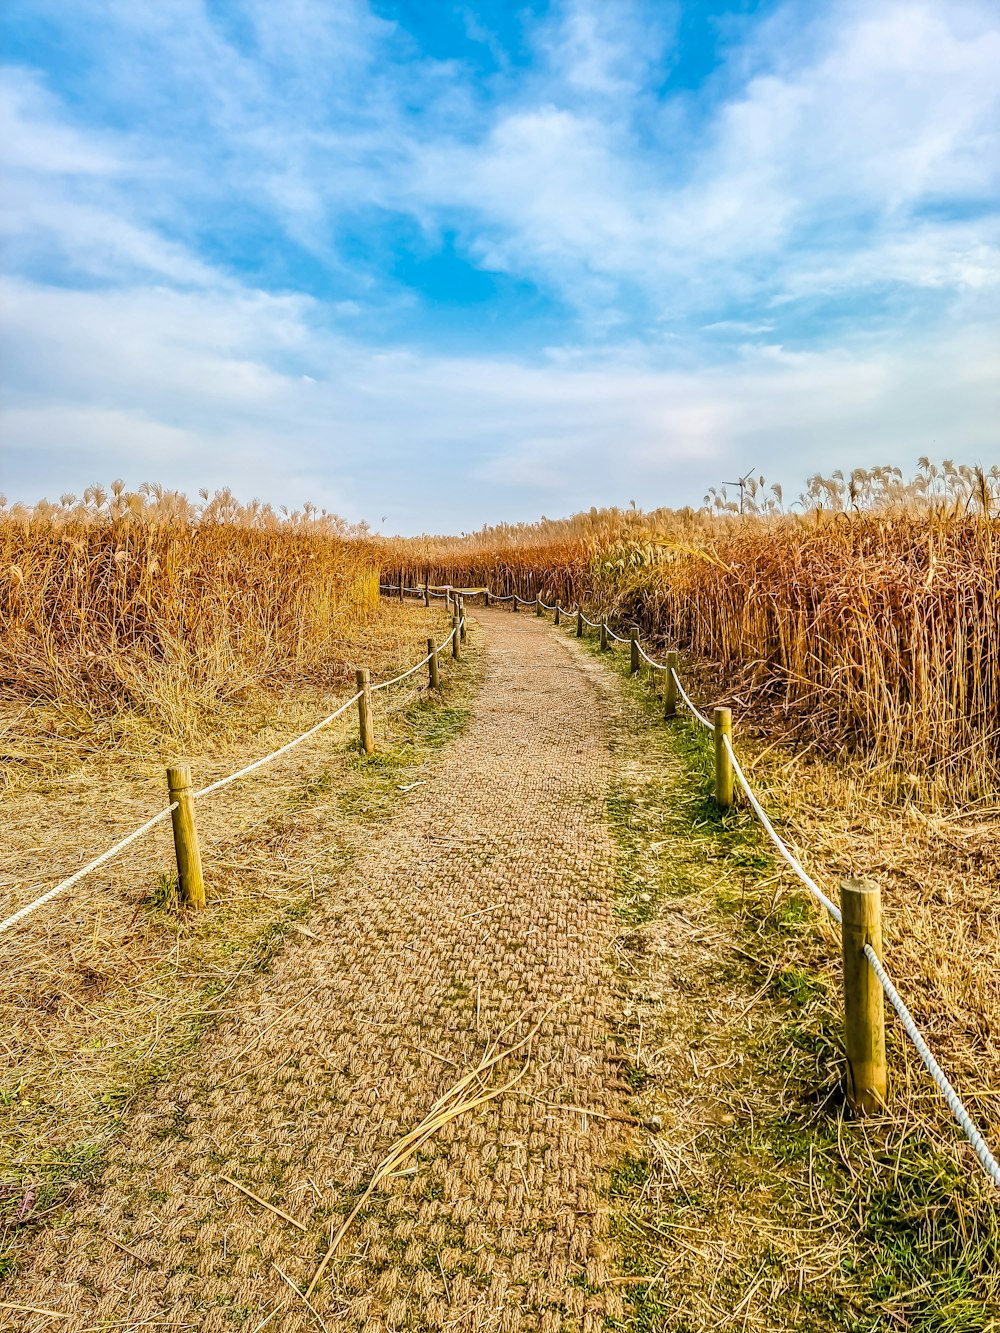 a dirt path in a field with tall grass